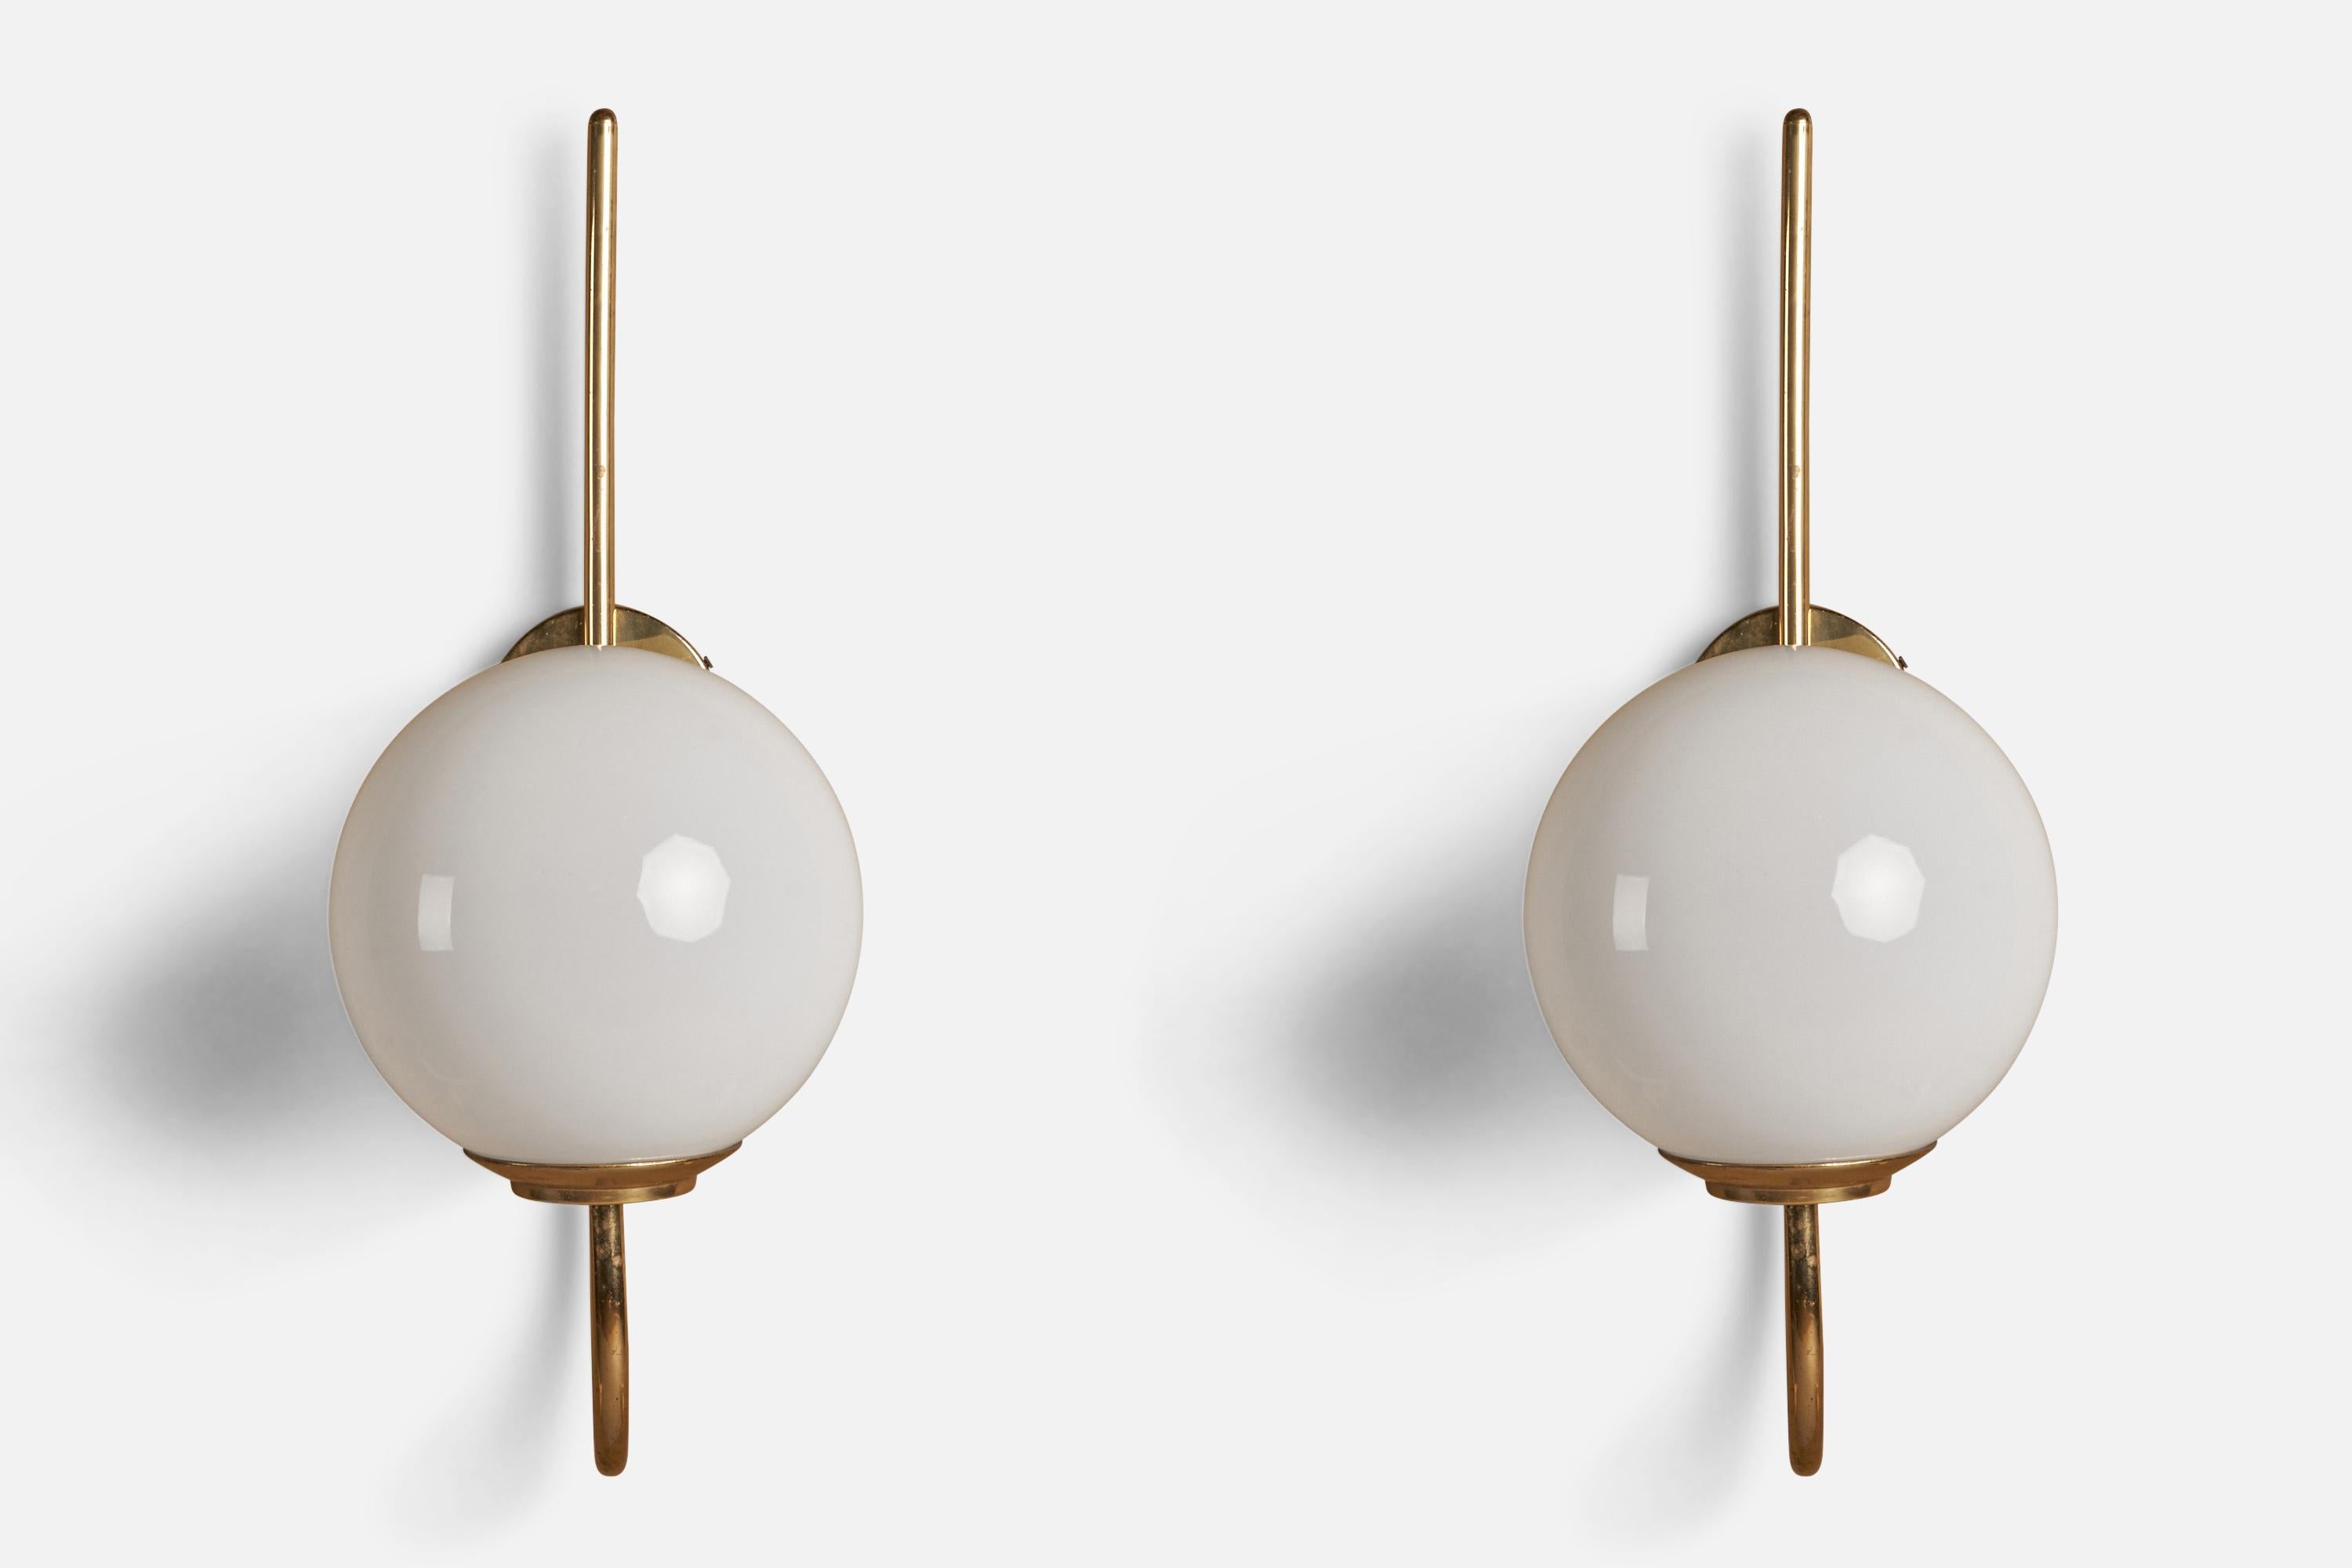 Mid-Century Modern Luigi Caccia Dominioni, Sizeable Wall Lights, Brass, Glass, Italy, 1950s For Sale